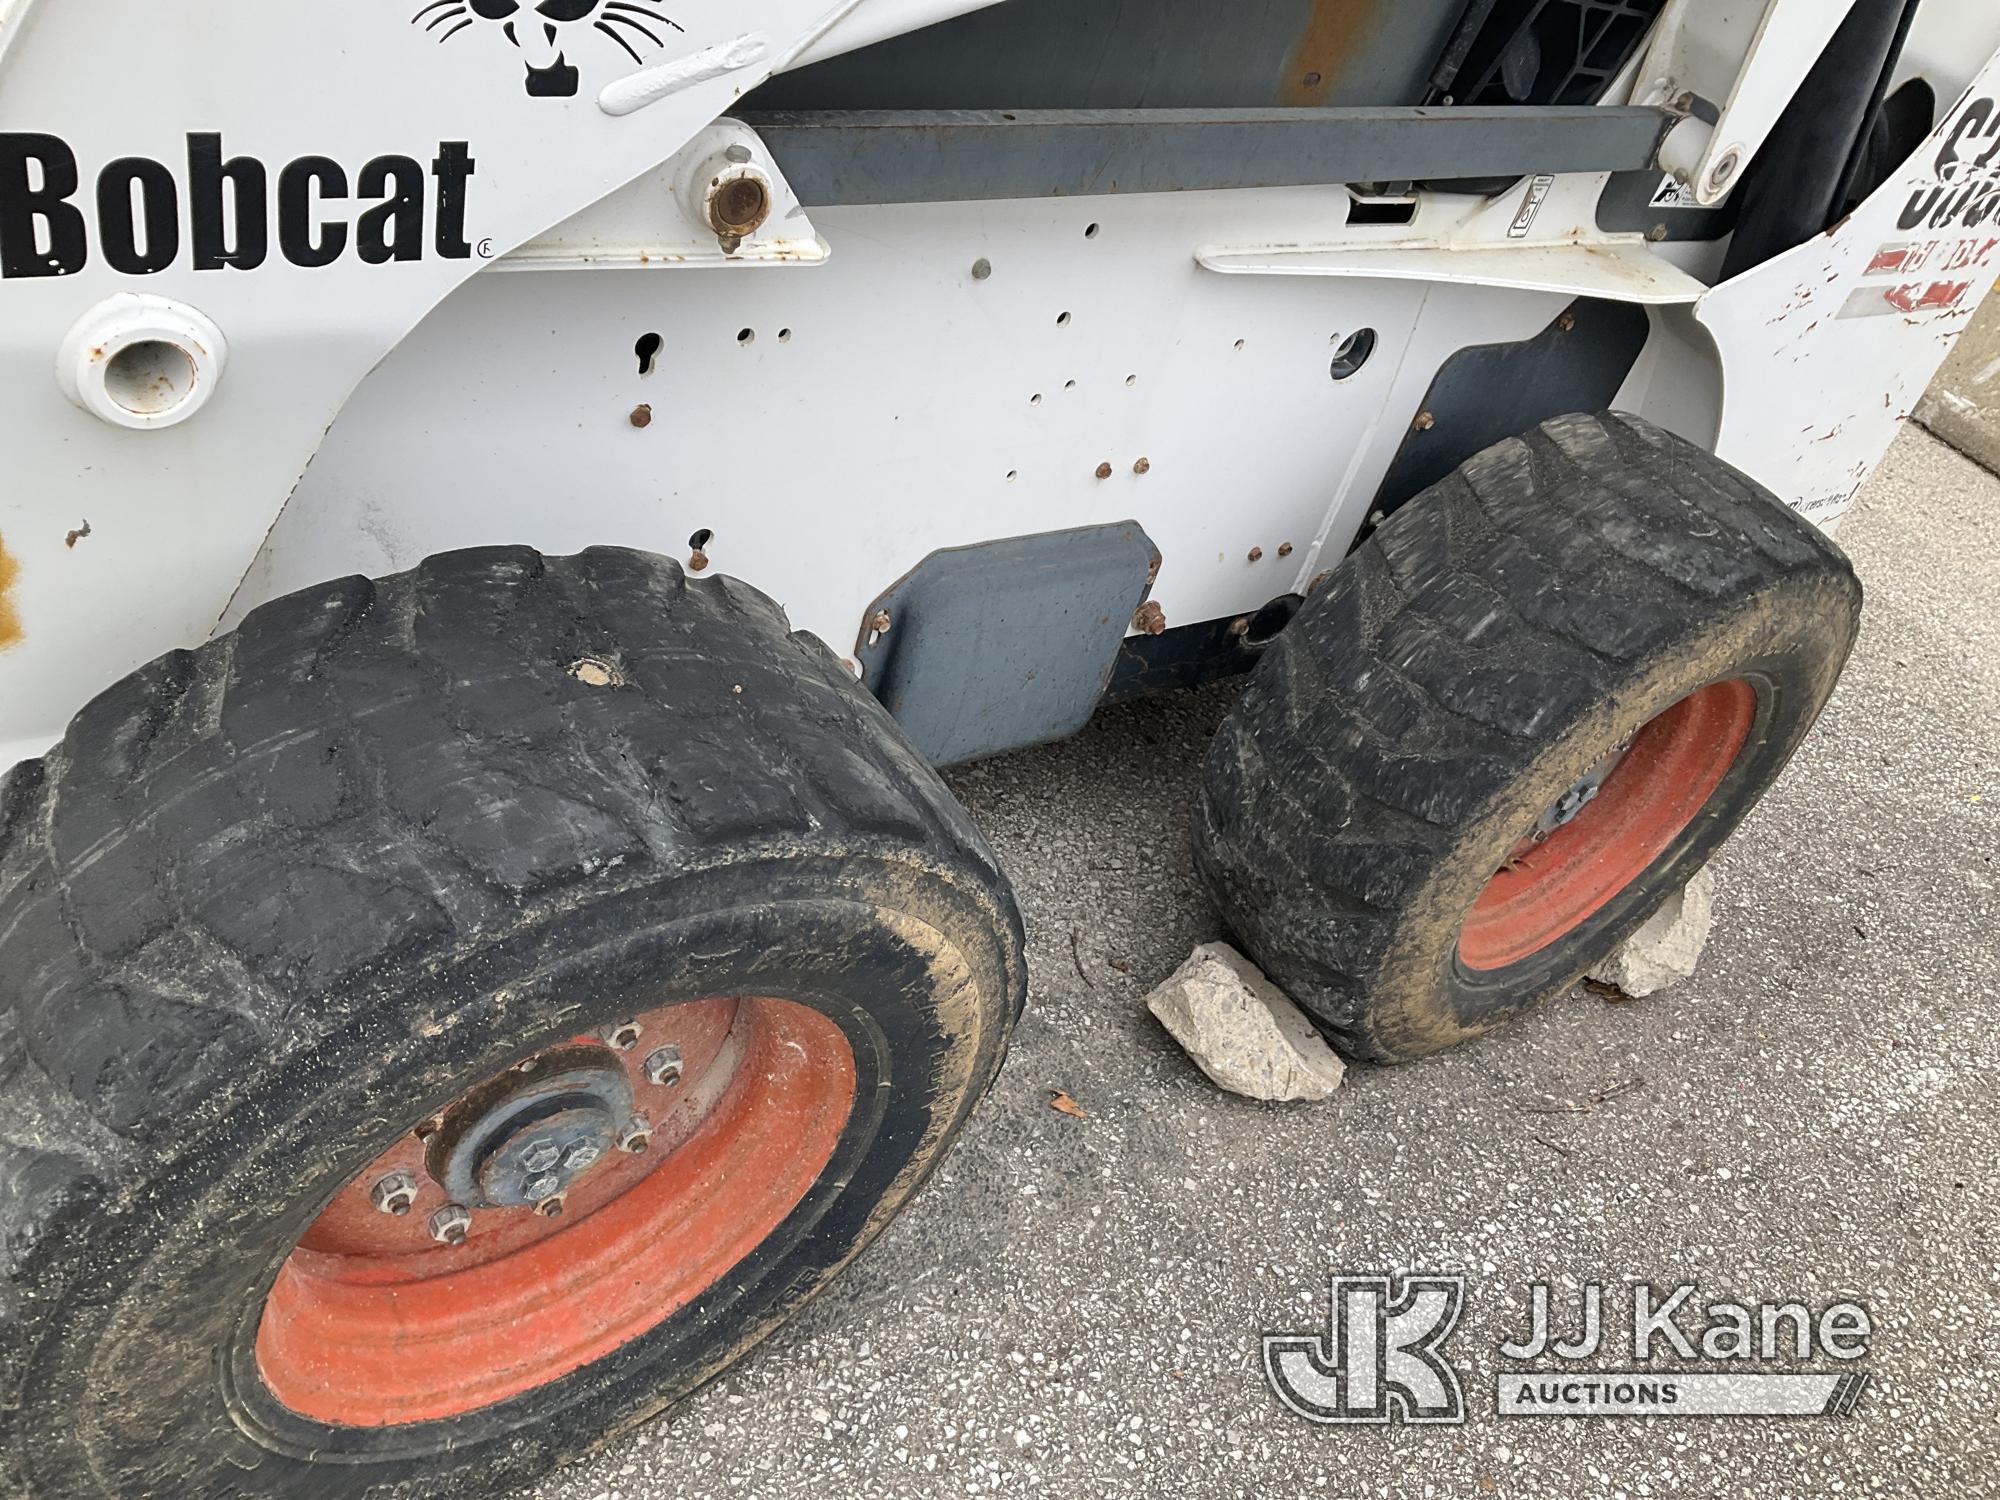 (Kansas City, MO) 2003 Bobcat S300 Rubber Tired Skid Steer Loader Not Running, Condition Unknown